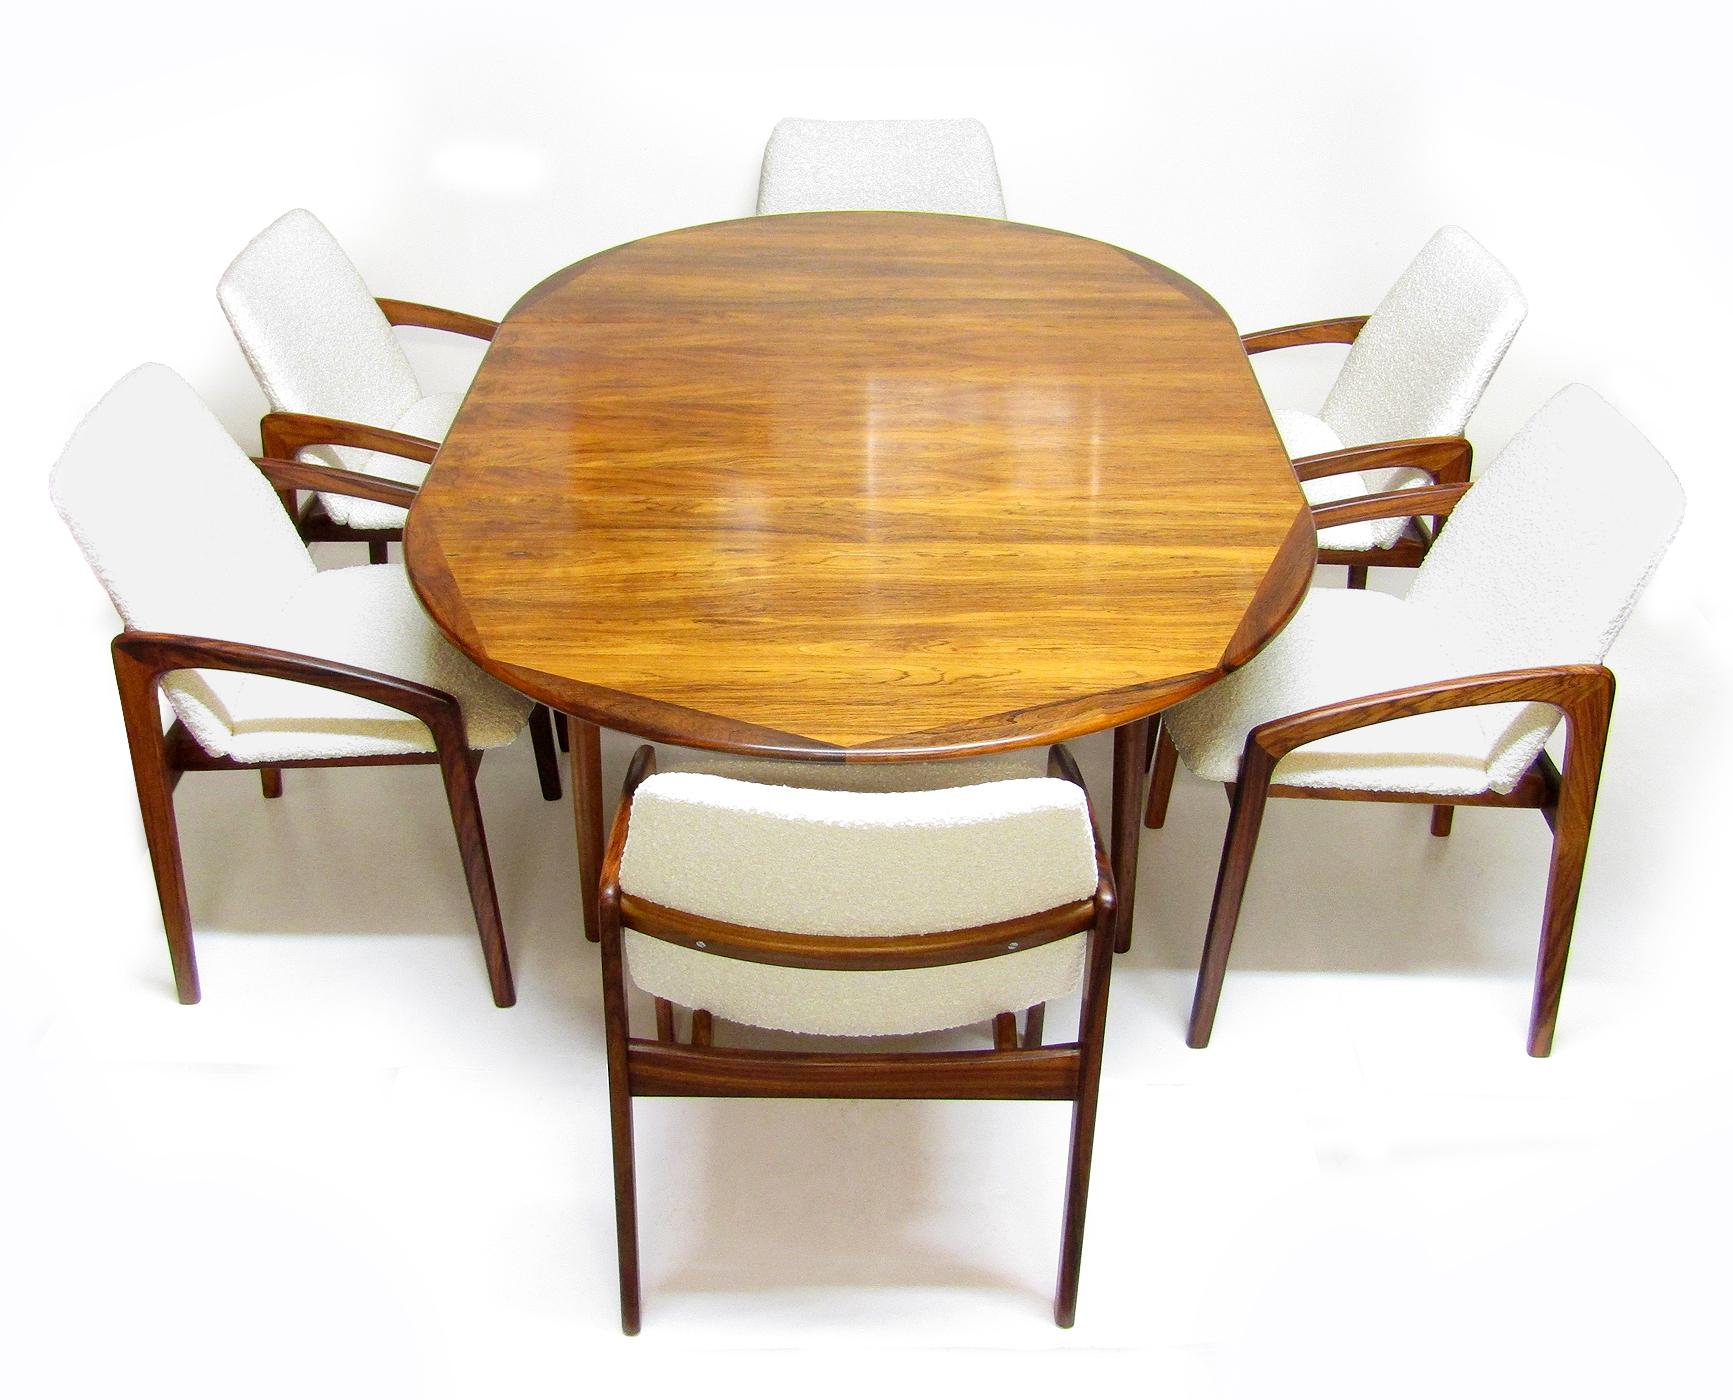 Mid-Century Modern 1960s Danish Rosewood Extending Dining Table by Georg Petersens